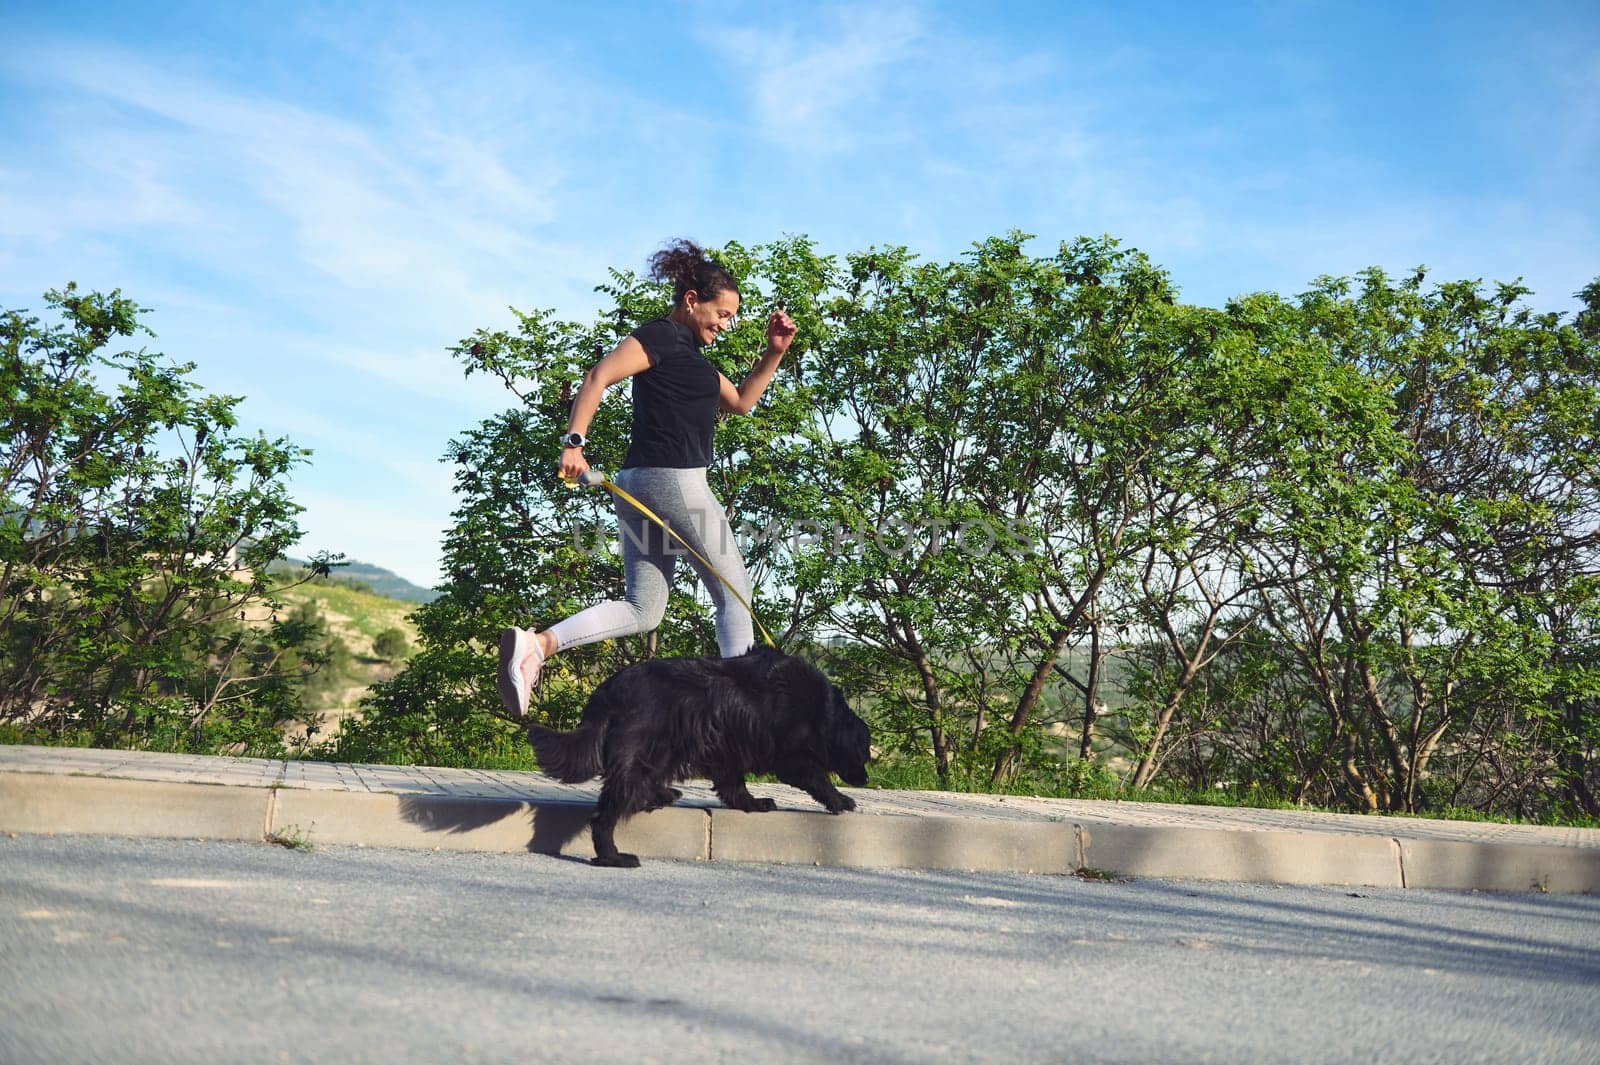 Sporty active woman running with her dog on leash in mountains nature. People. Playing pets. Love for animals and nature concept by artgf